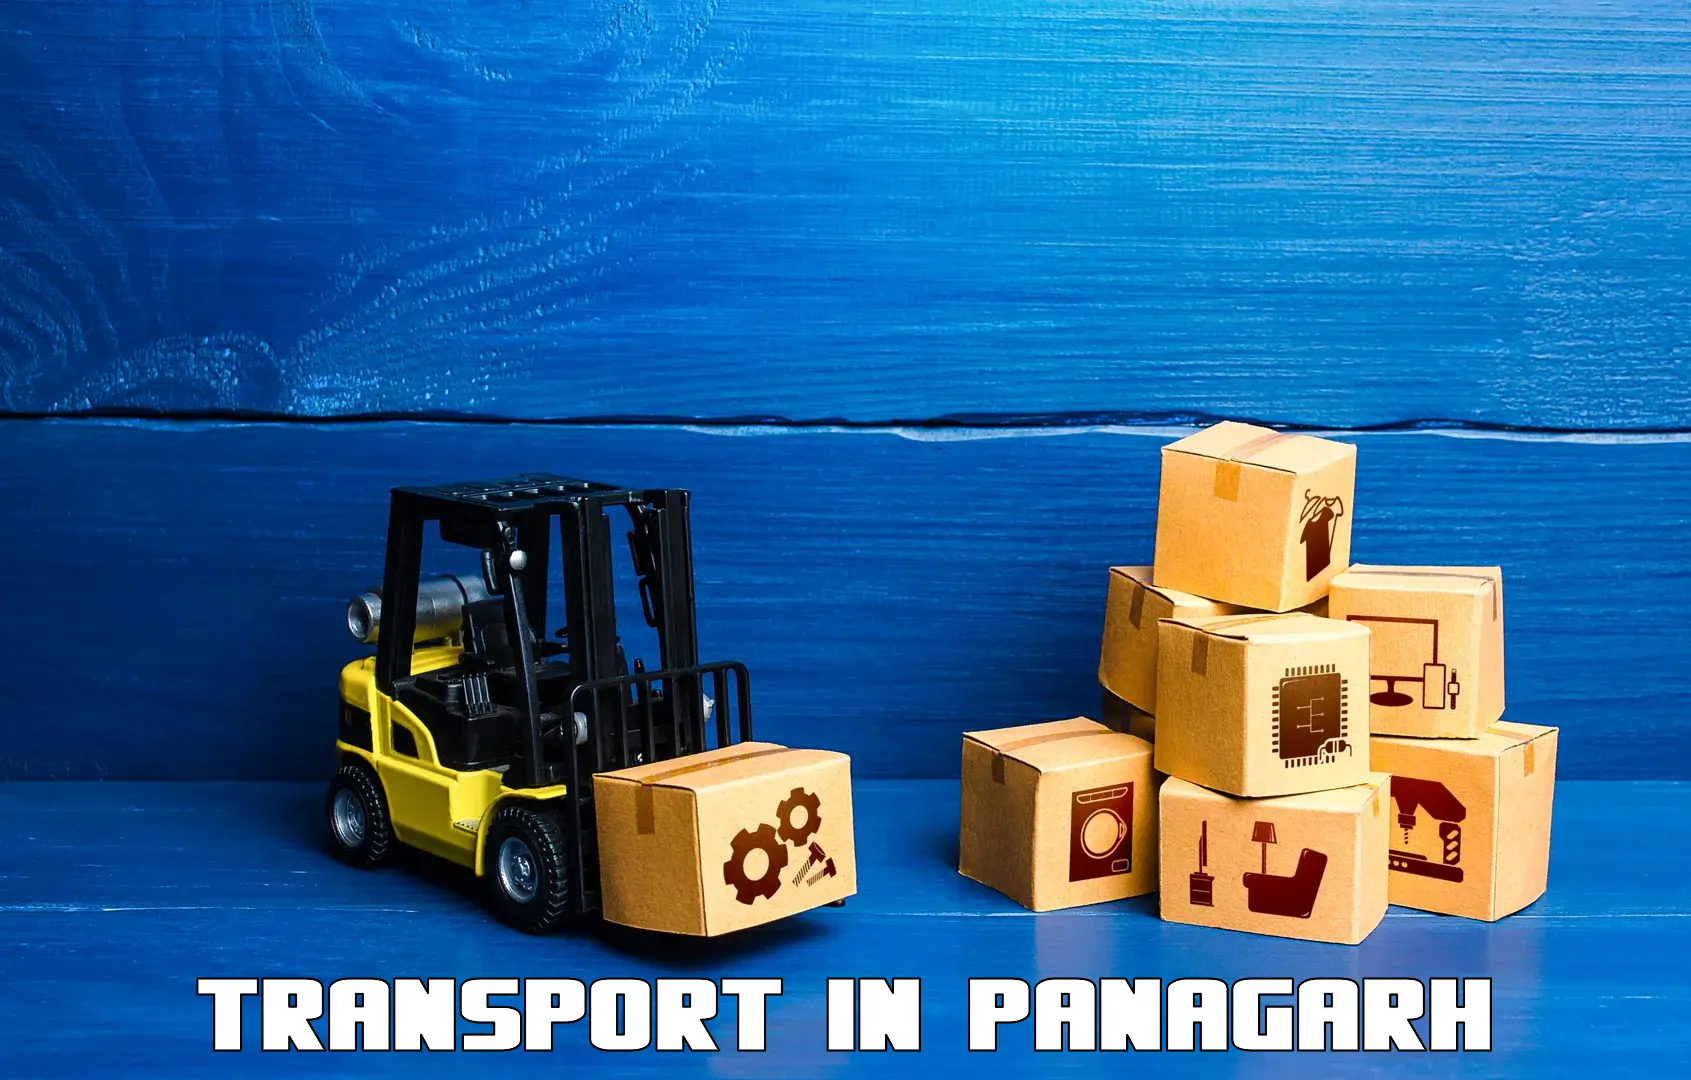 Domestic transport services in Panagarh